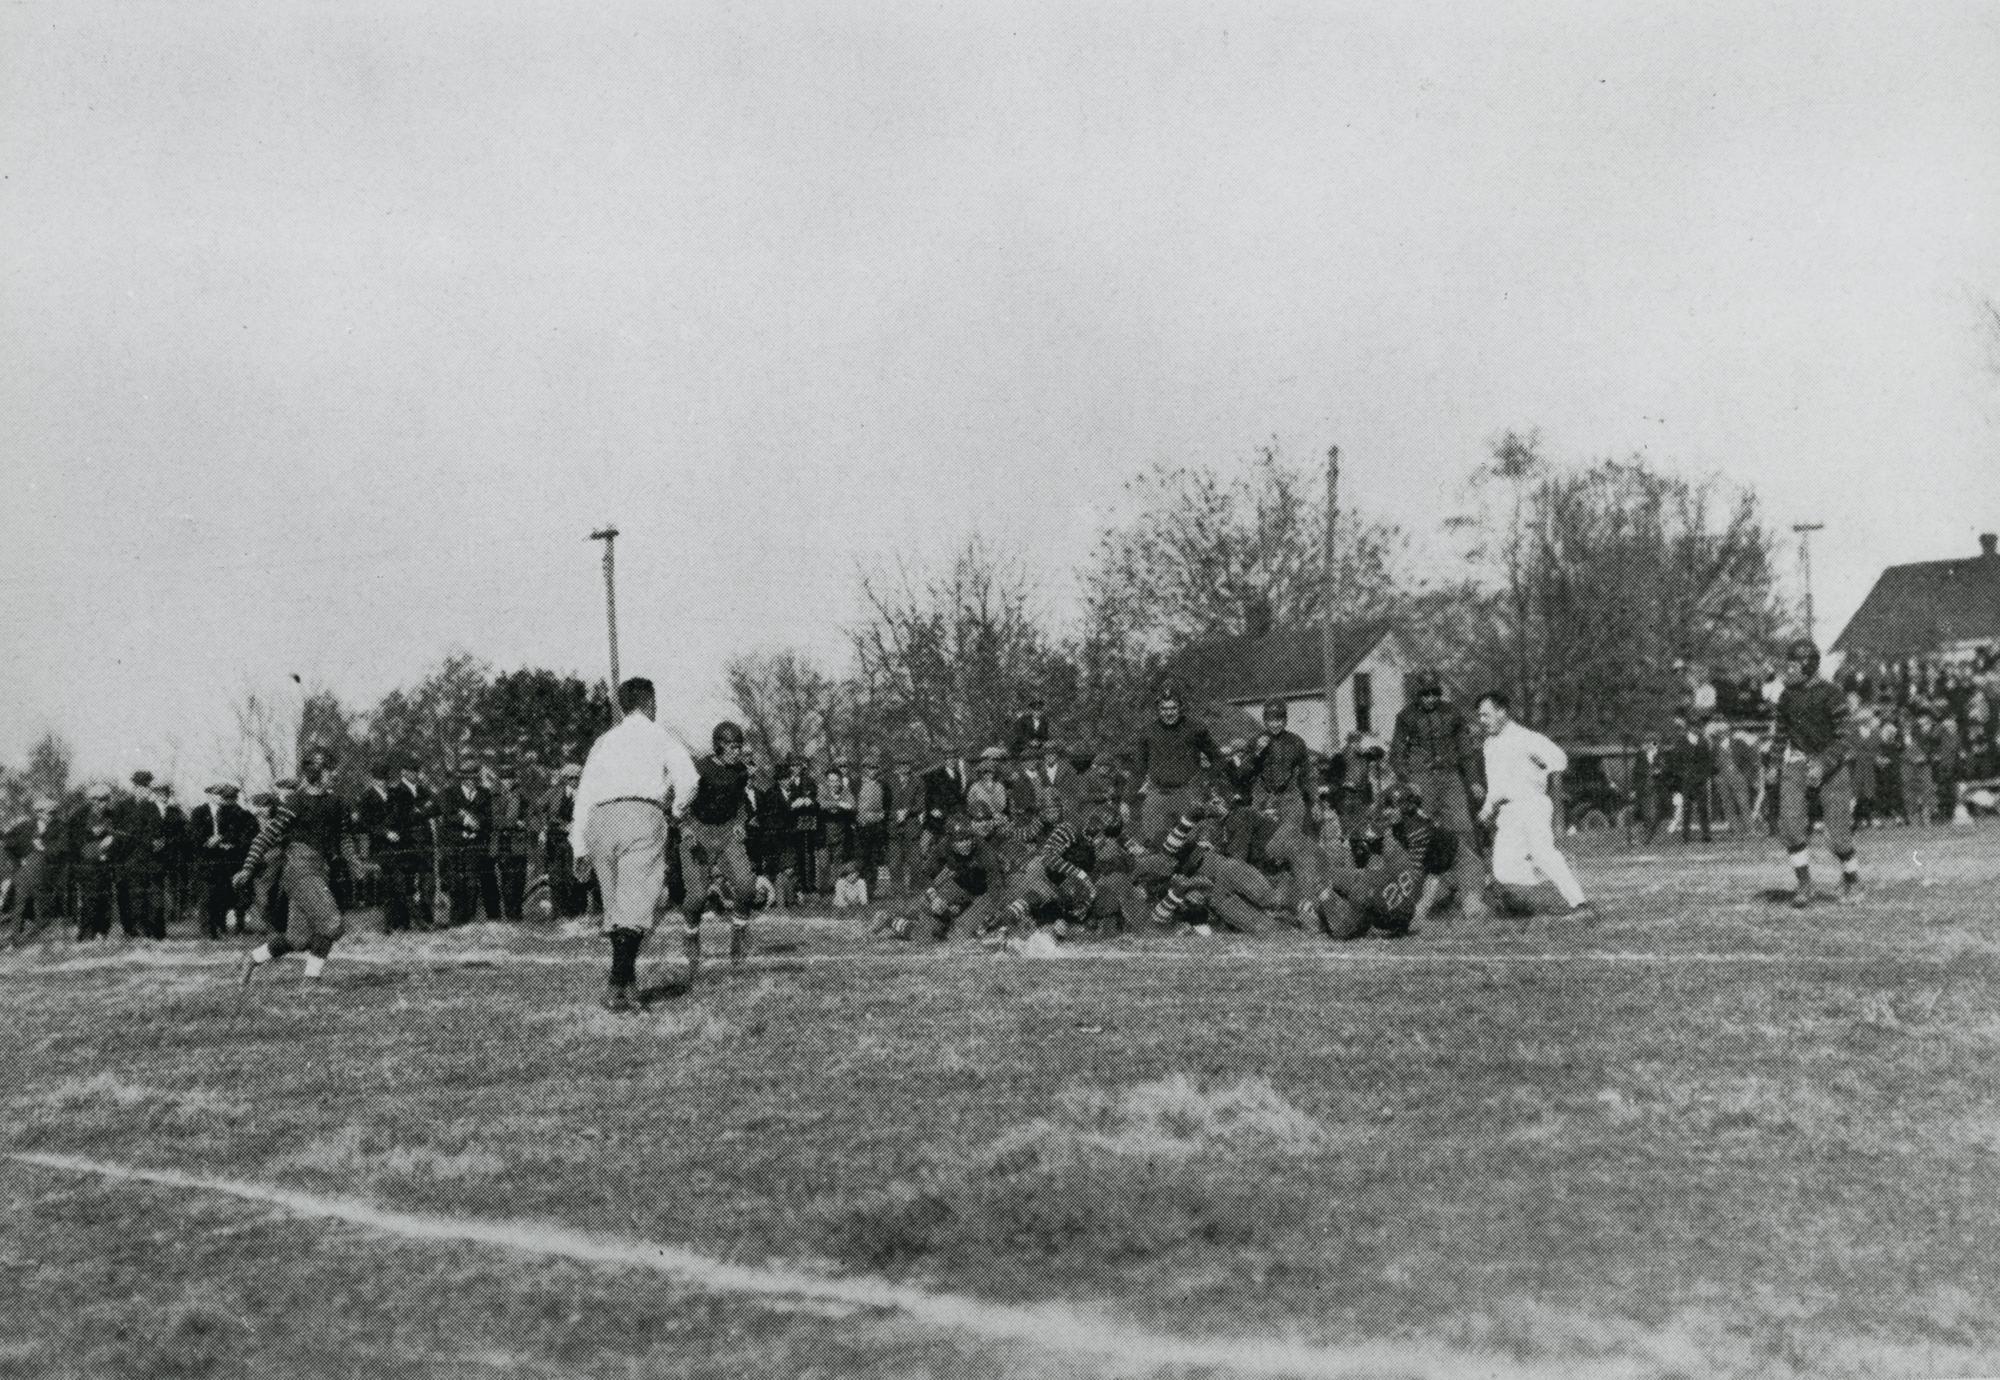 End of football play by Wisconsin Mining School